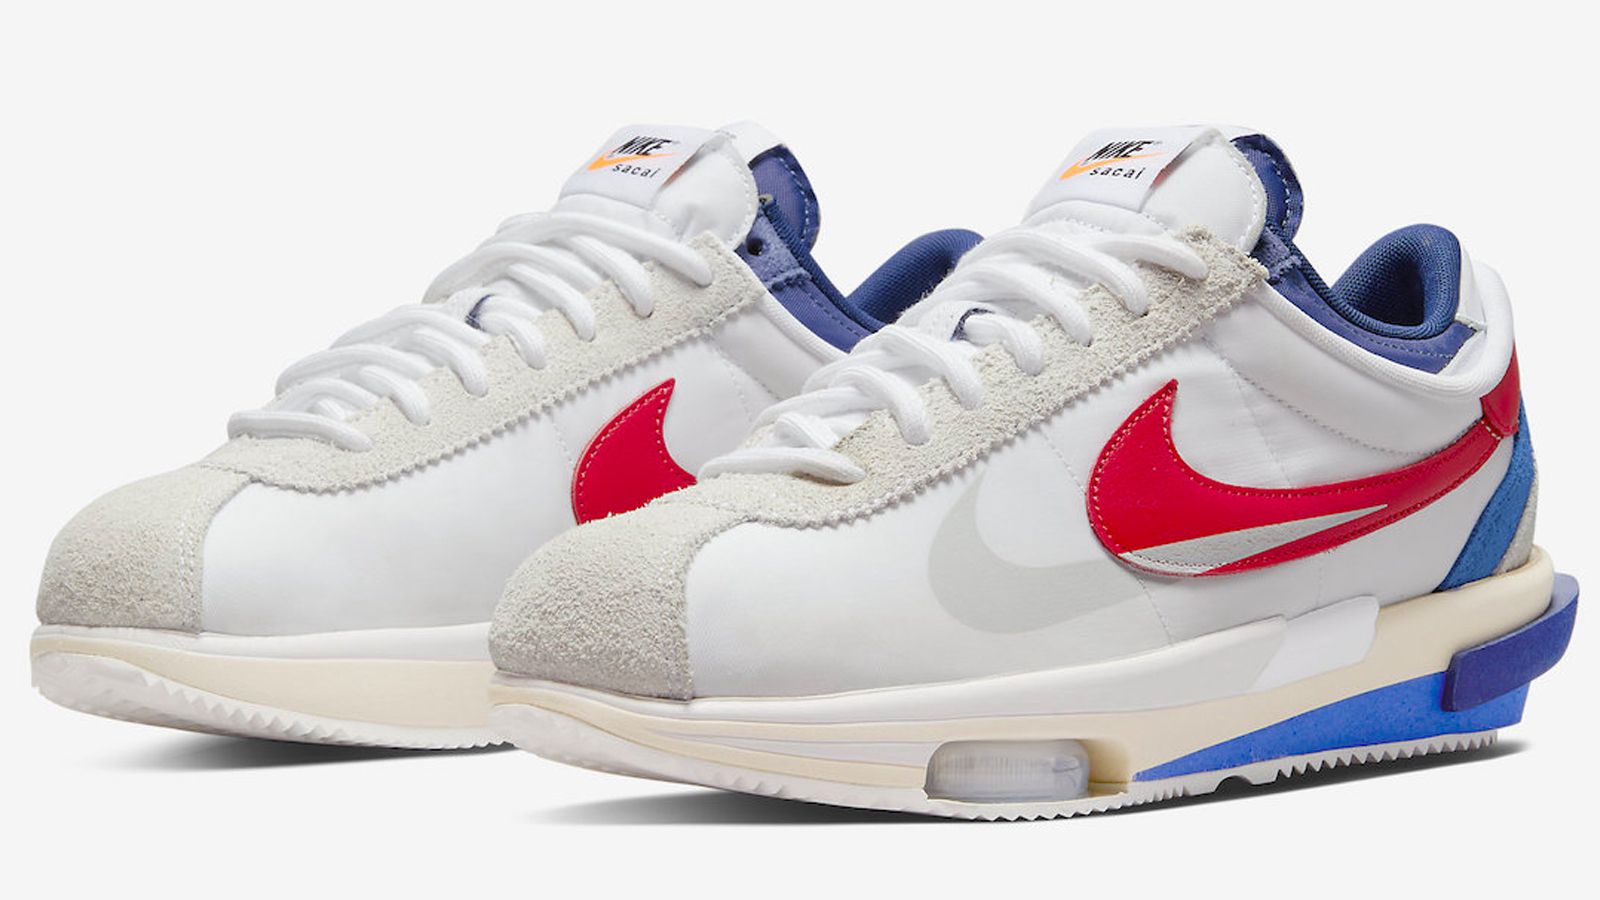 In Stock At Laced: sacai x Nike Cortez 4.0